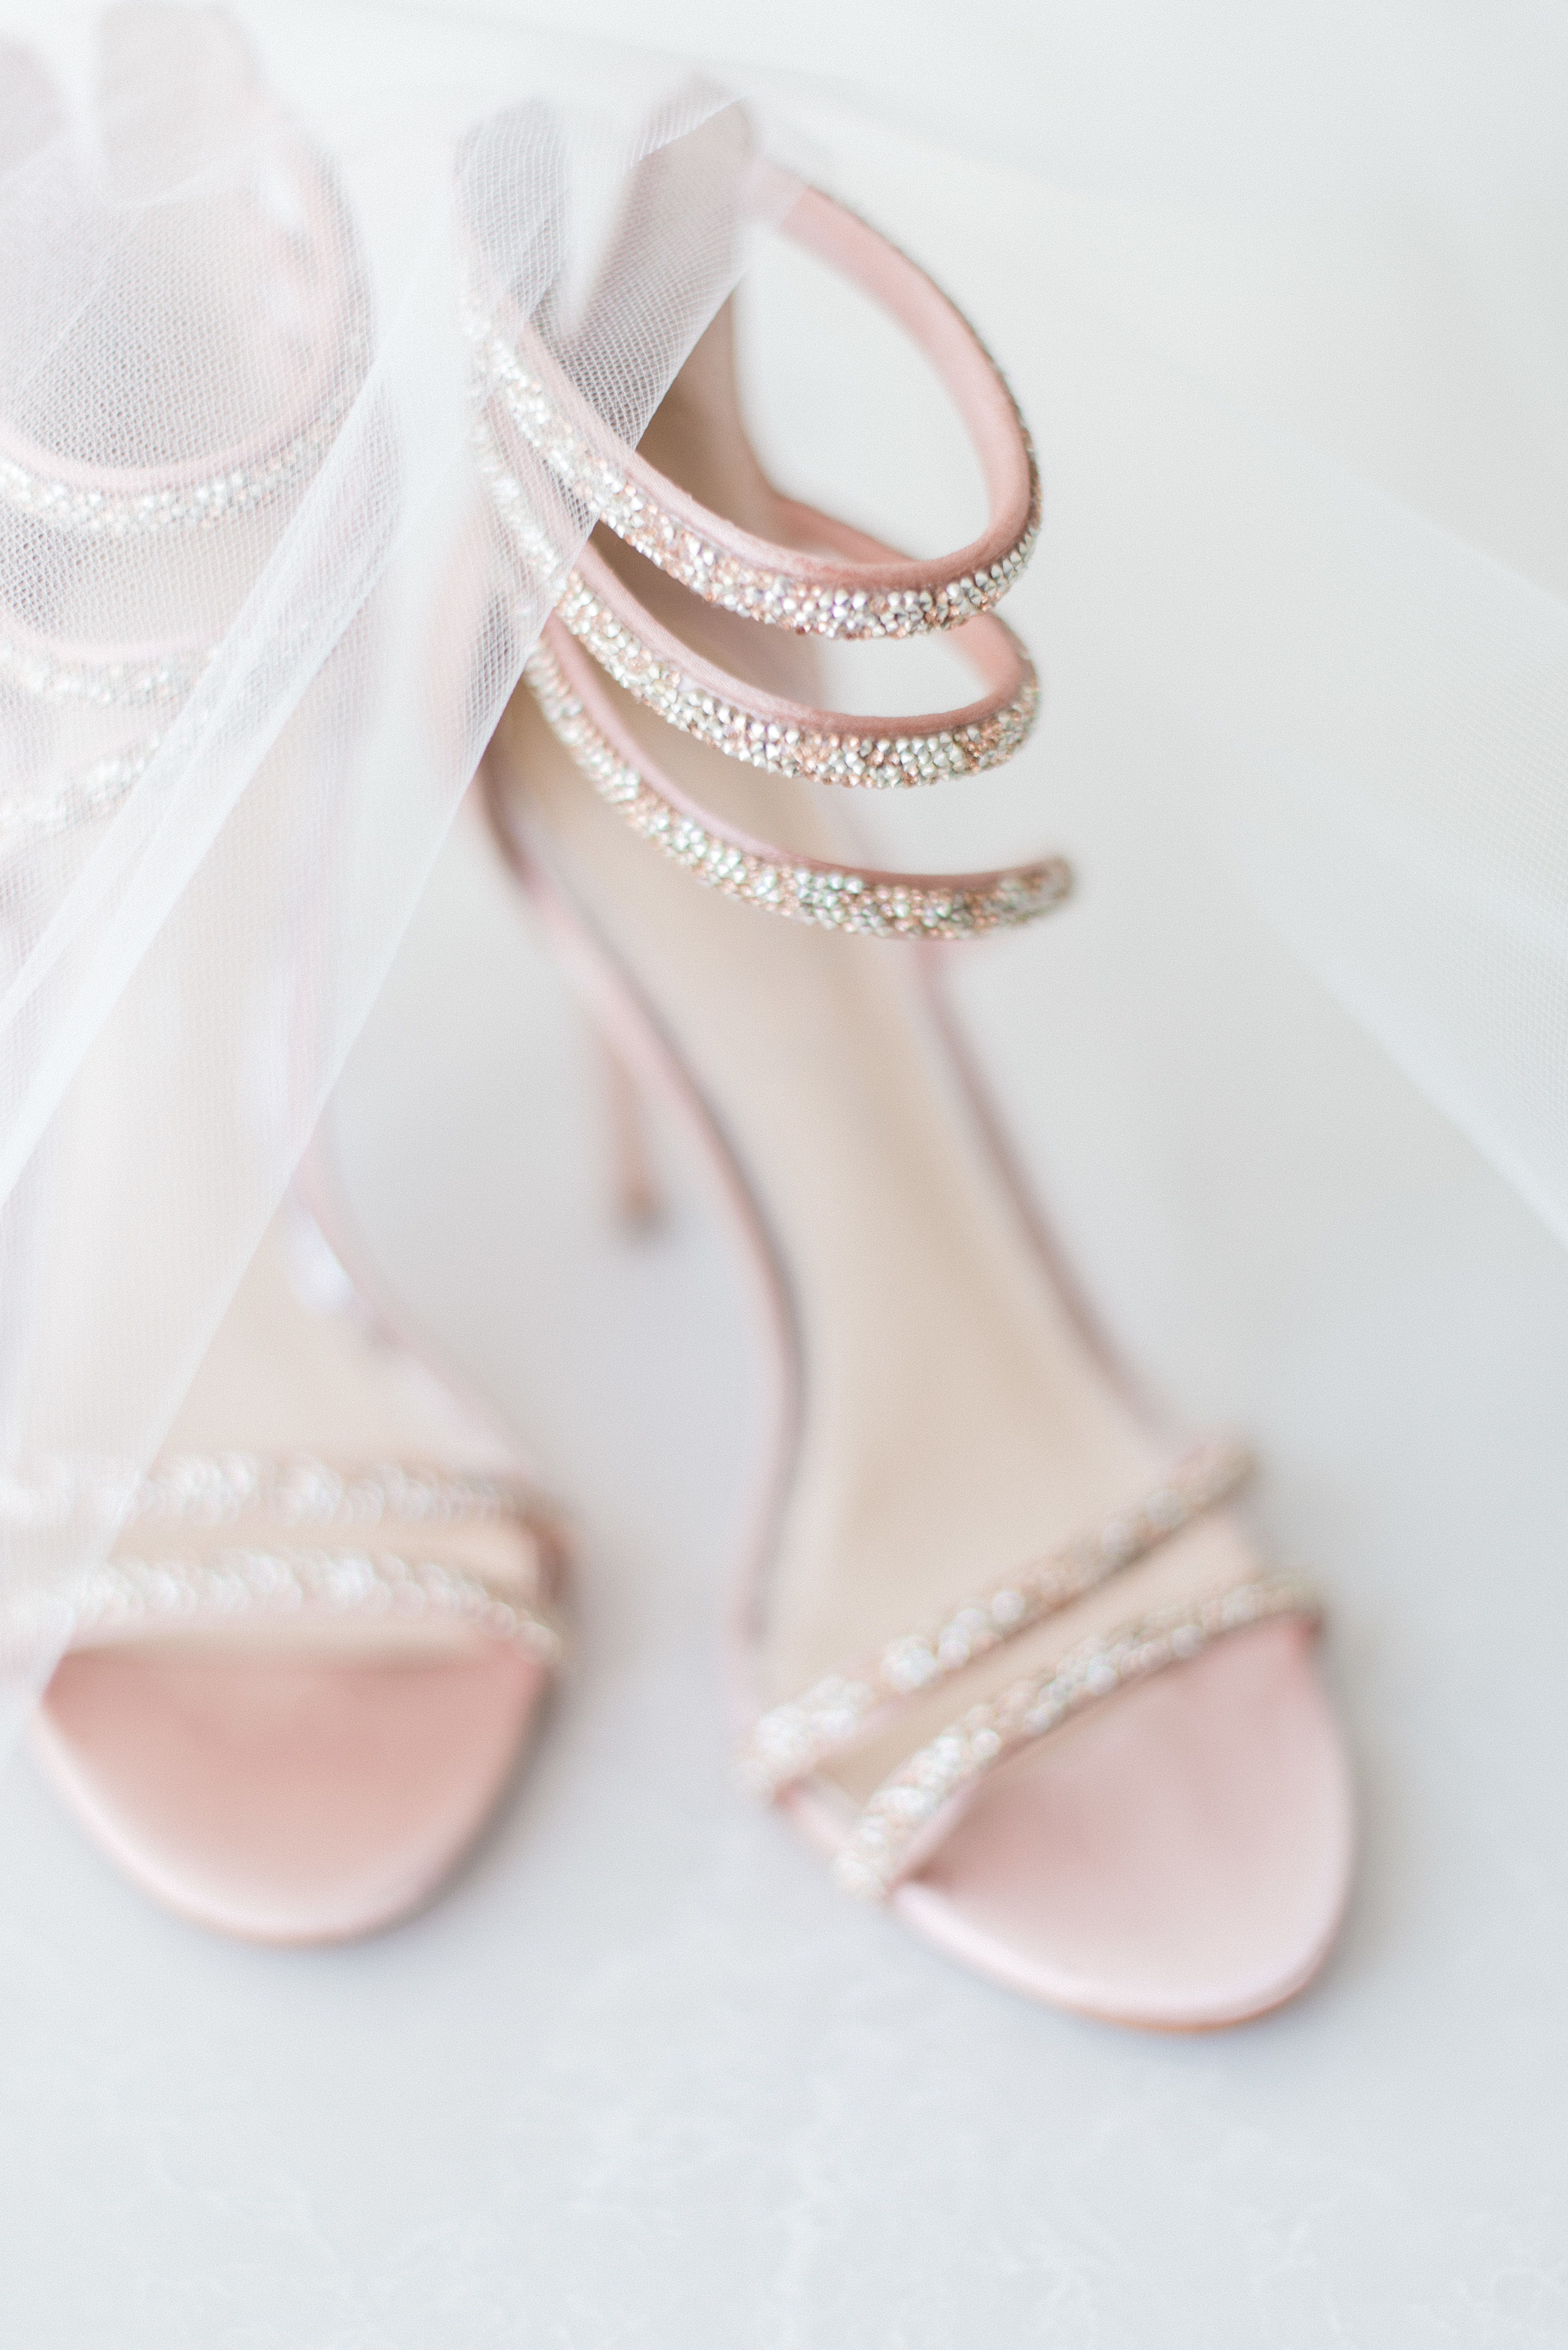 An Industrial Chic Wedding at the Horticulture Building -   13 wedding Shoes pink ideas